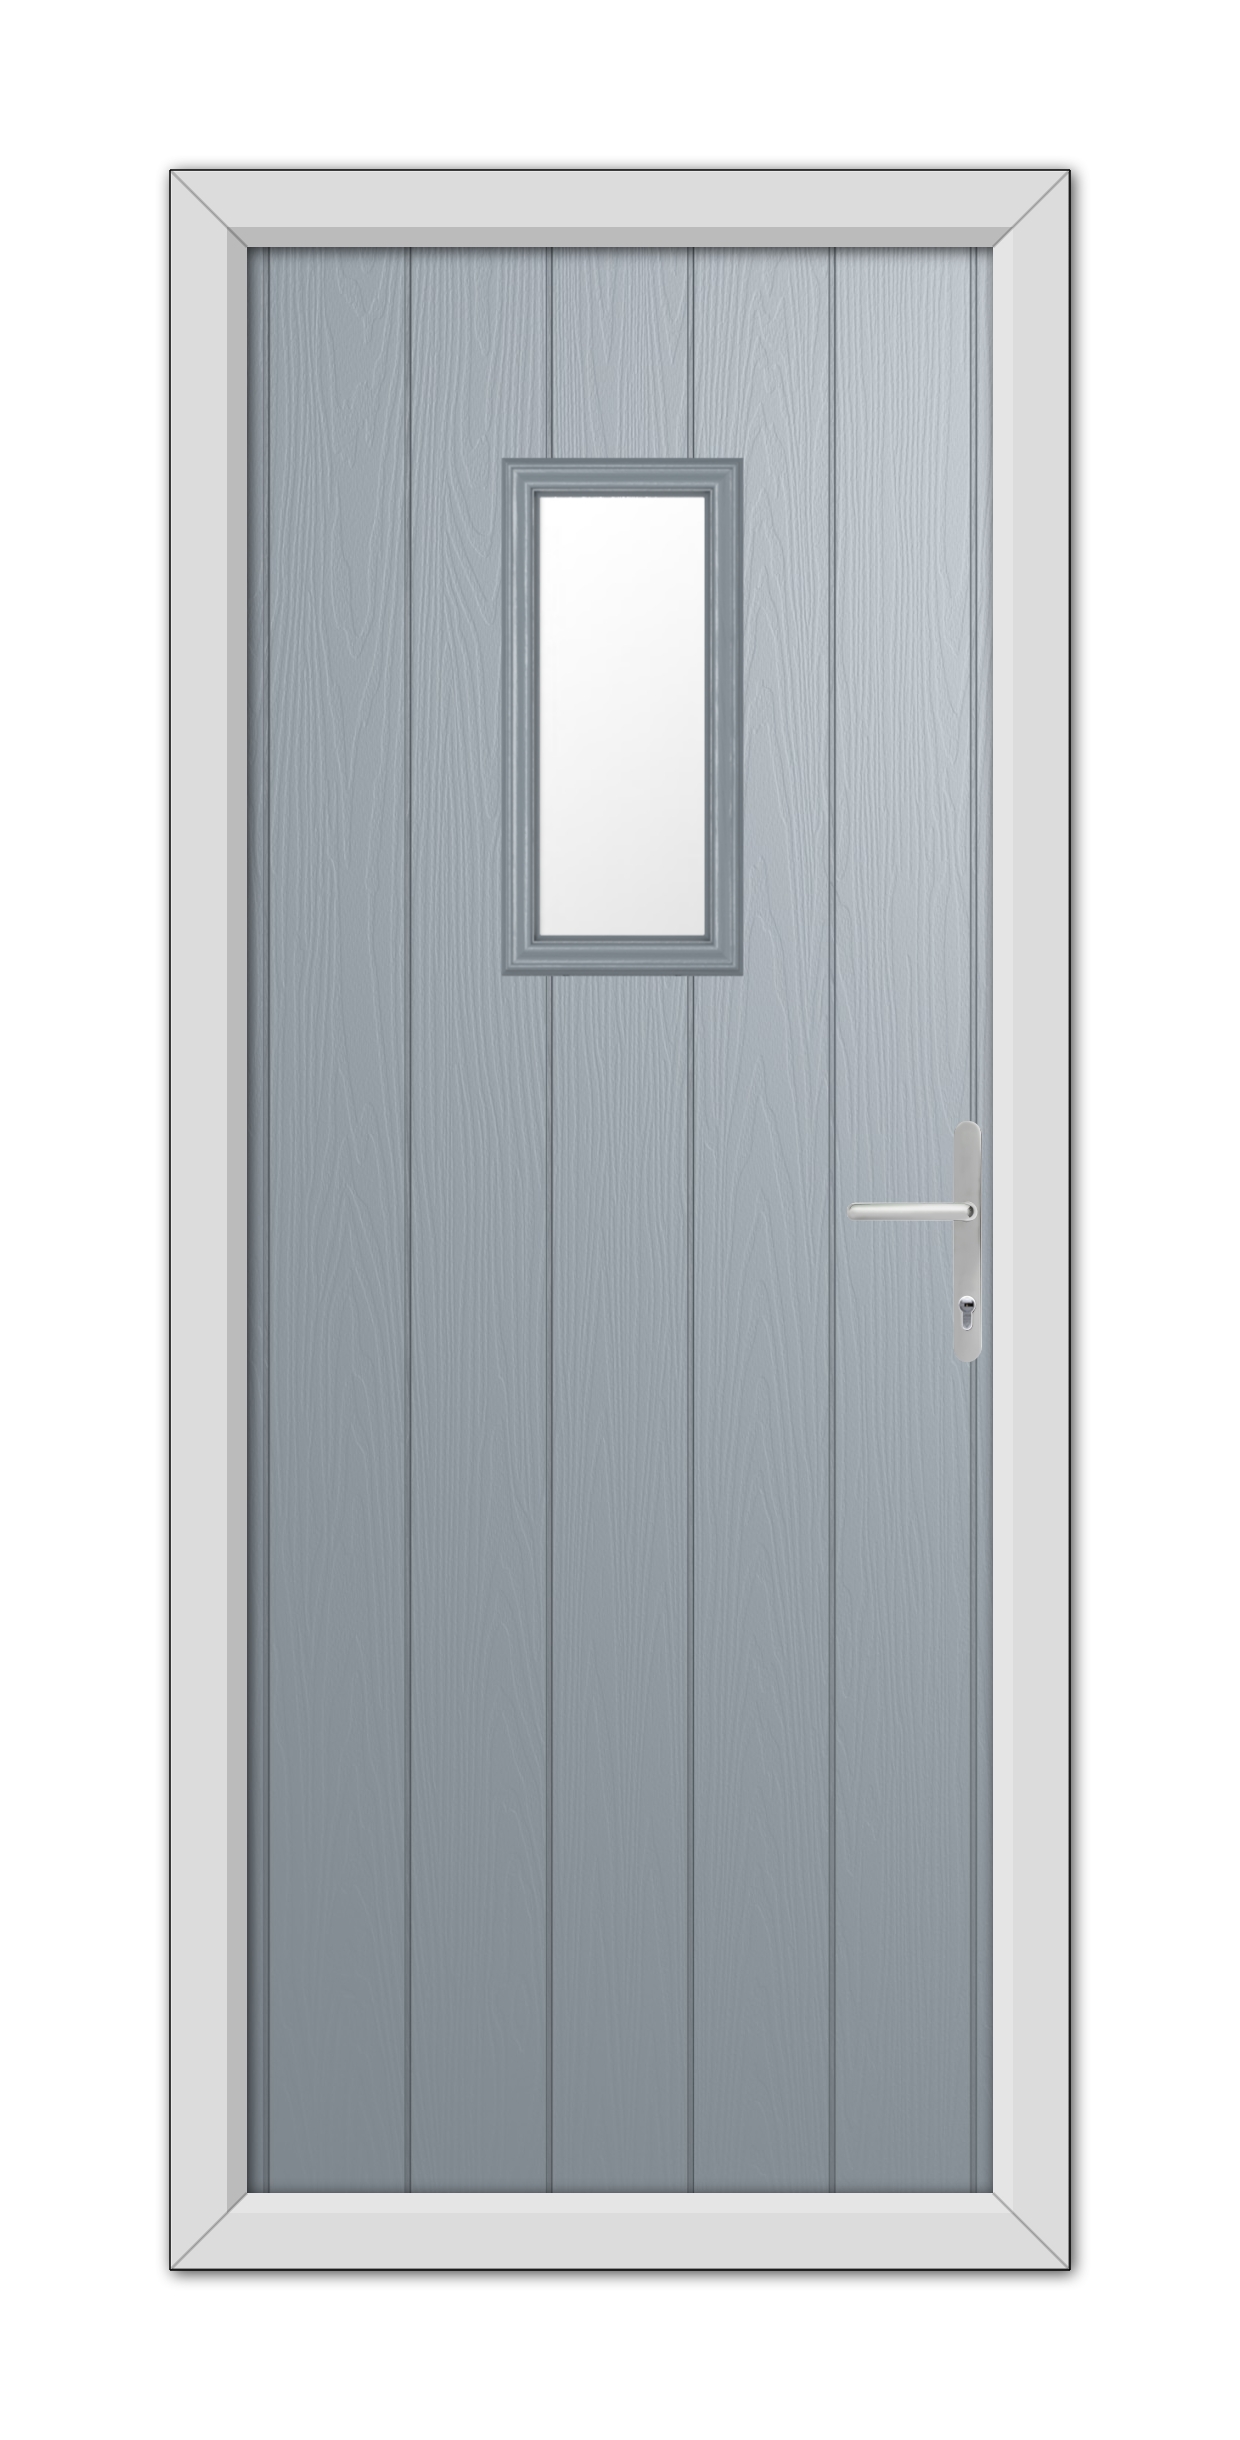 A French Grey Somerset Composite Door 48mm Timber Core featuring a vertical wood grain pattern, equipped with a silver handle and a small square window, set within a white frame.